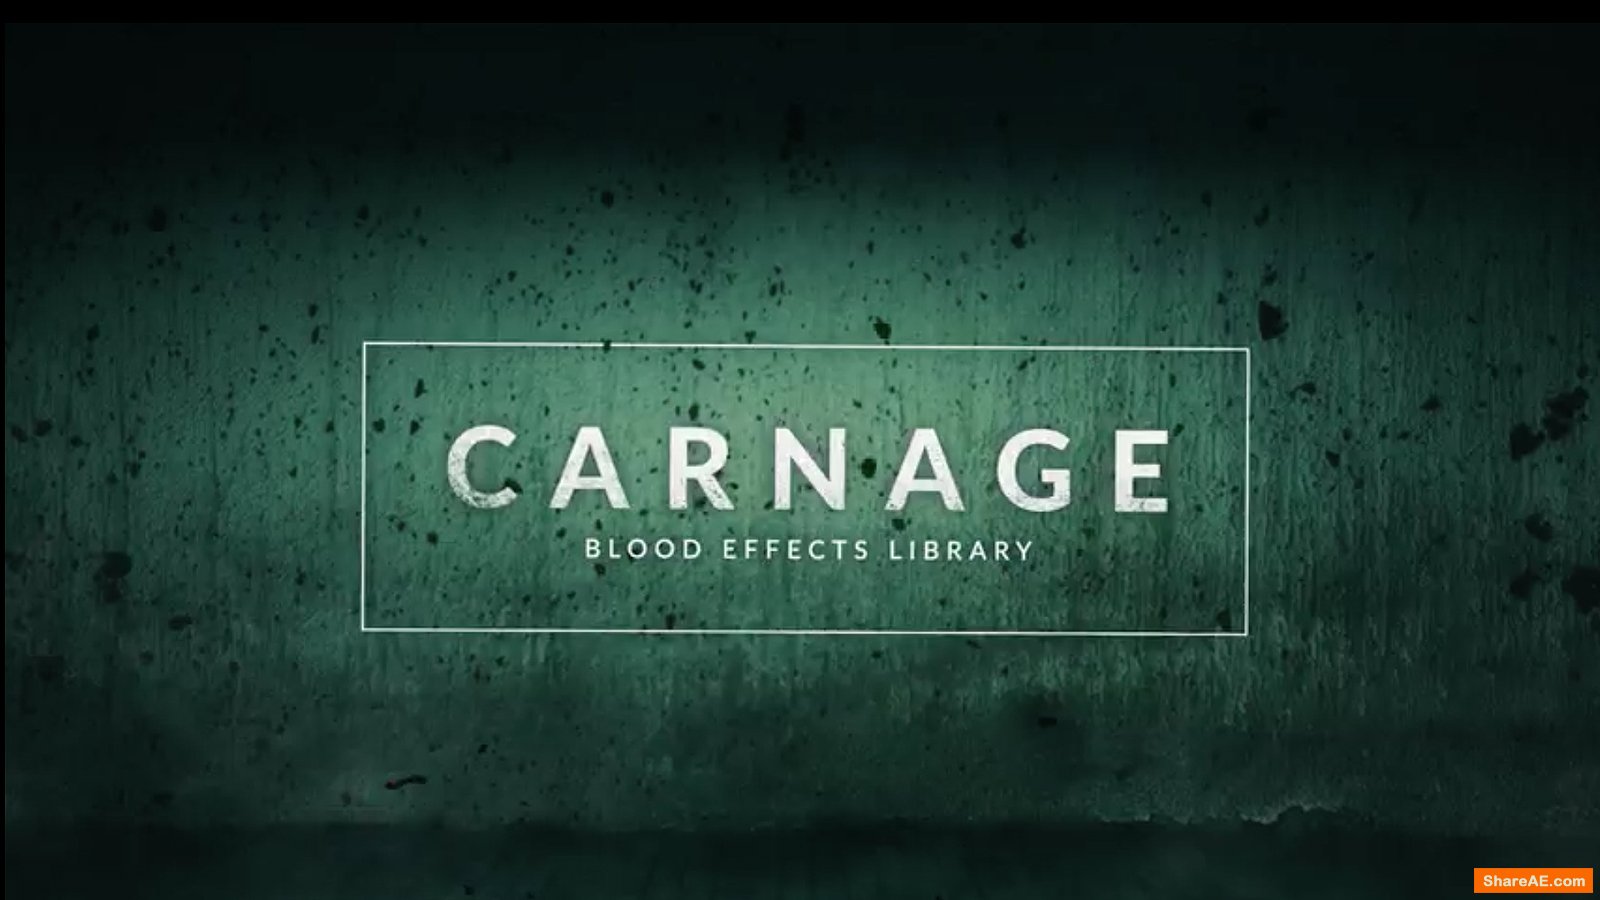 Carnage: 296 Blood Video Effects for Gory & Horror Scenes (RocketStock)